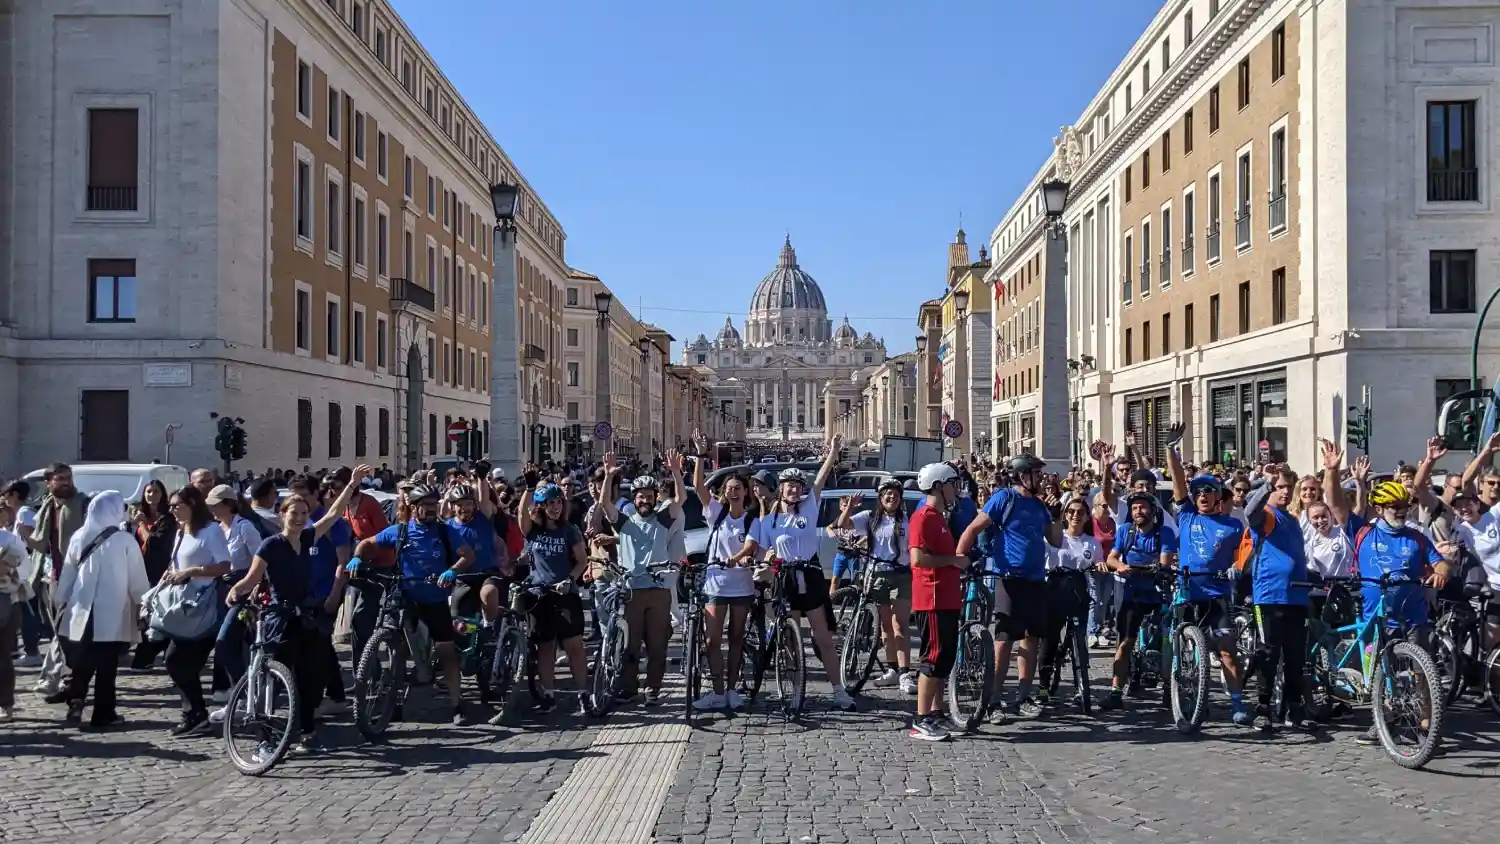 At St. Peter's during the last leg of the Arche tandem cycle tour